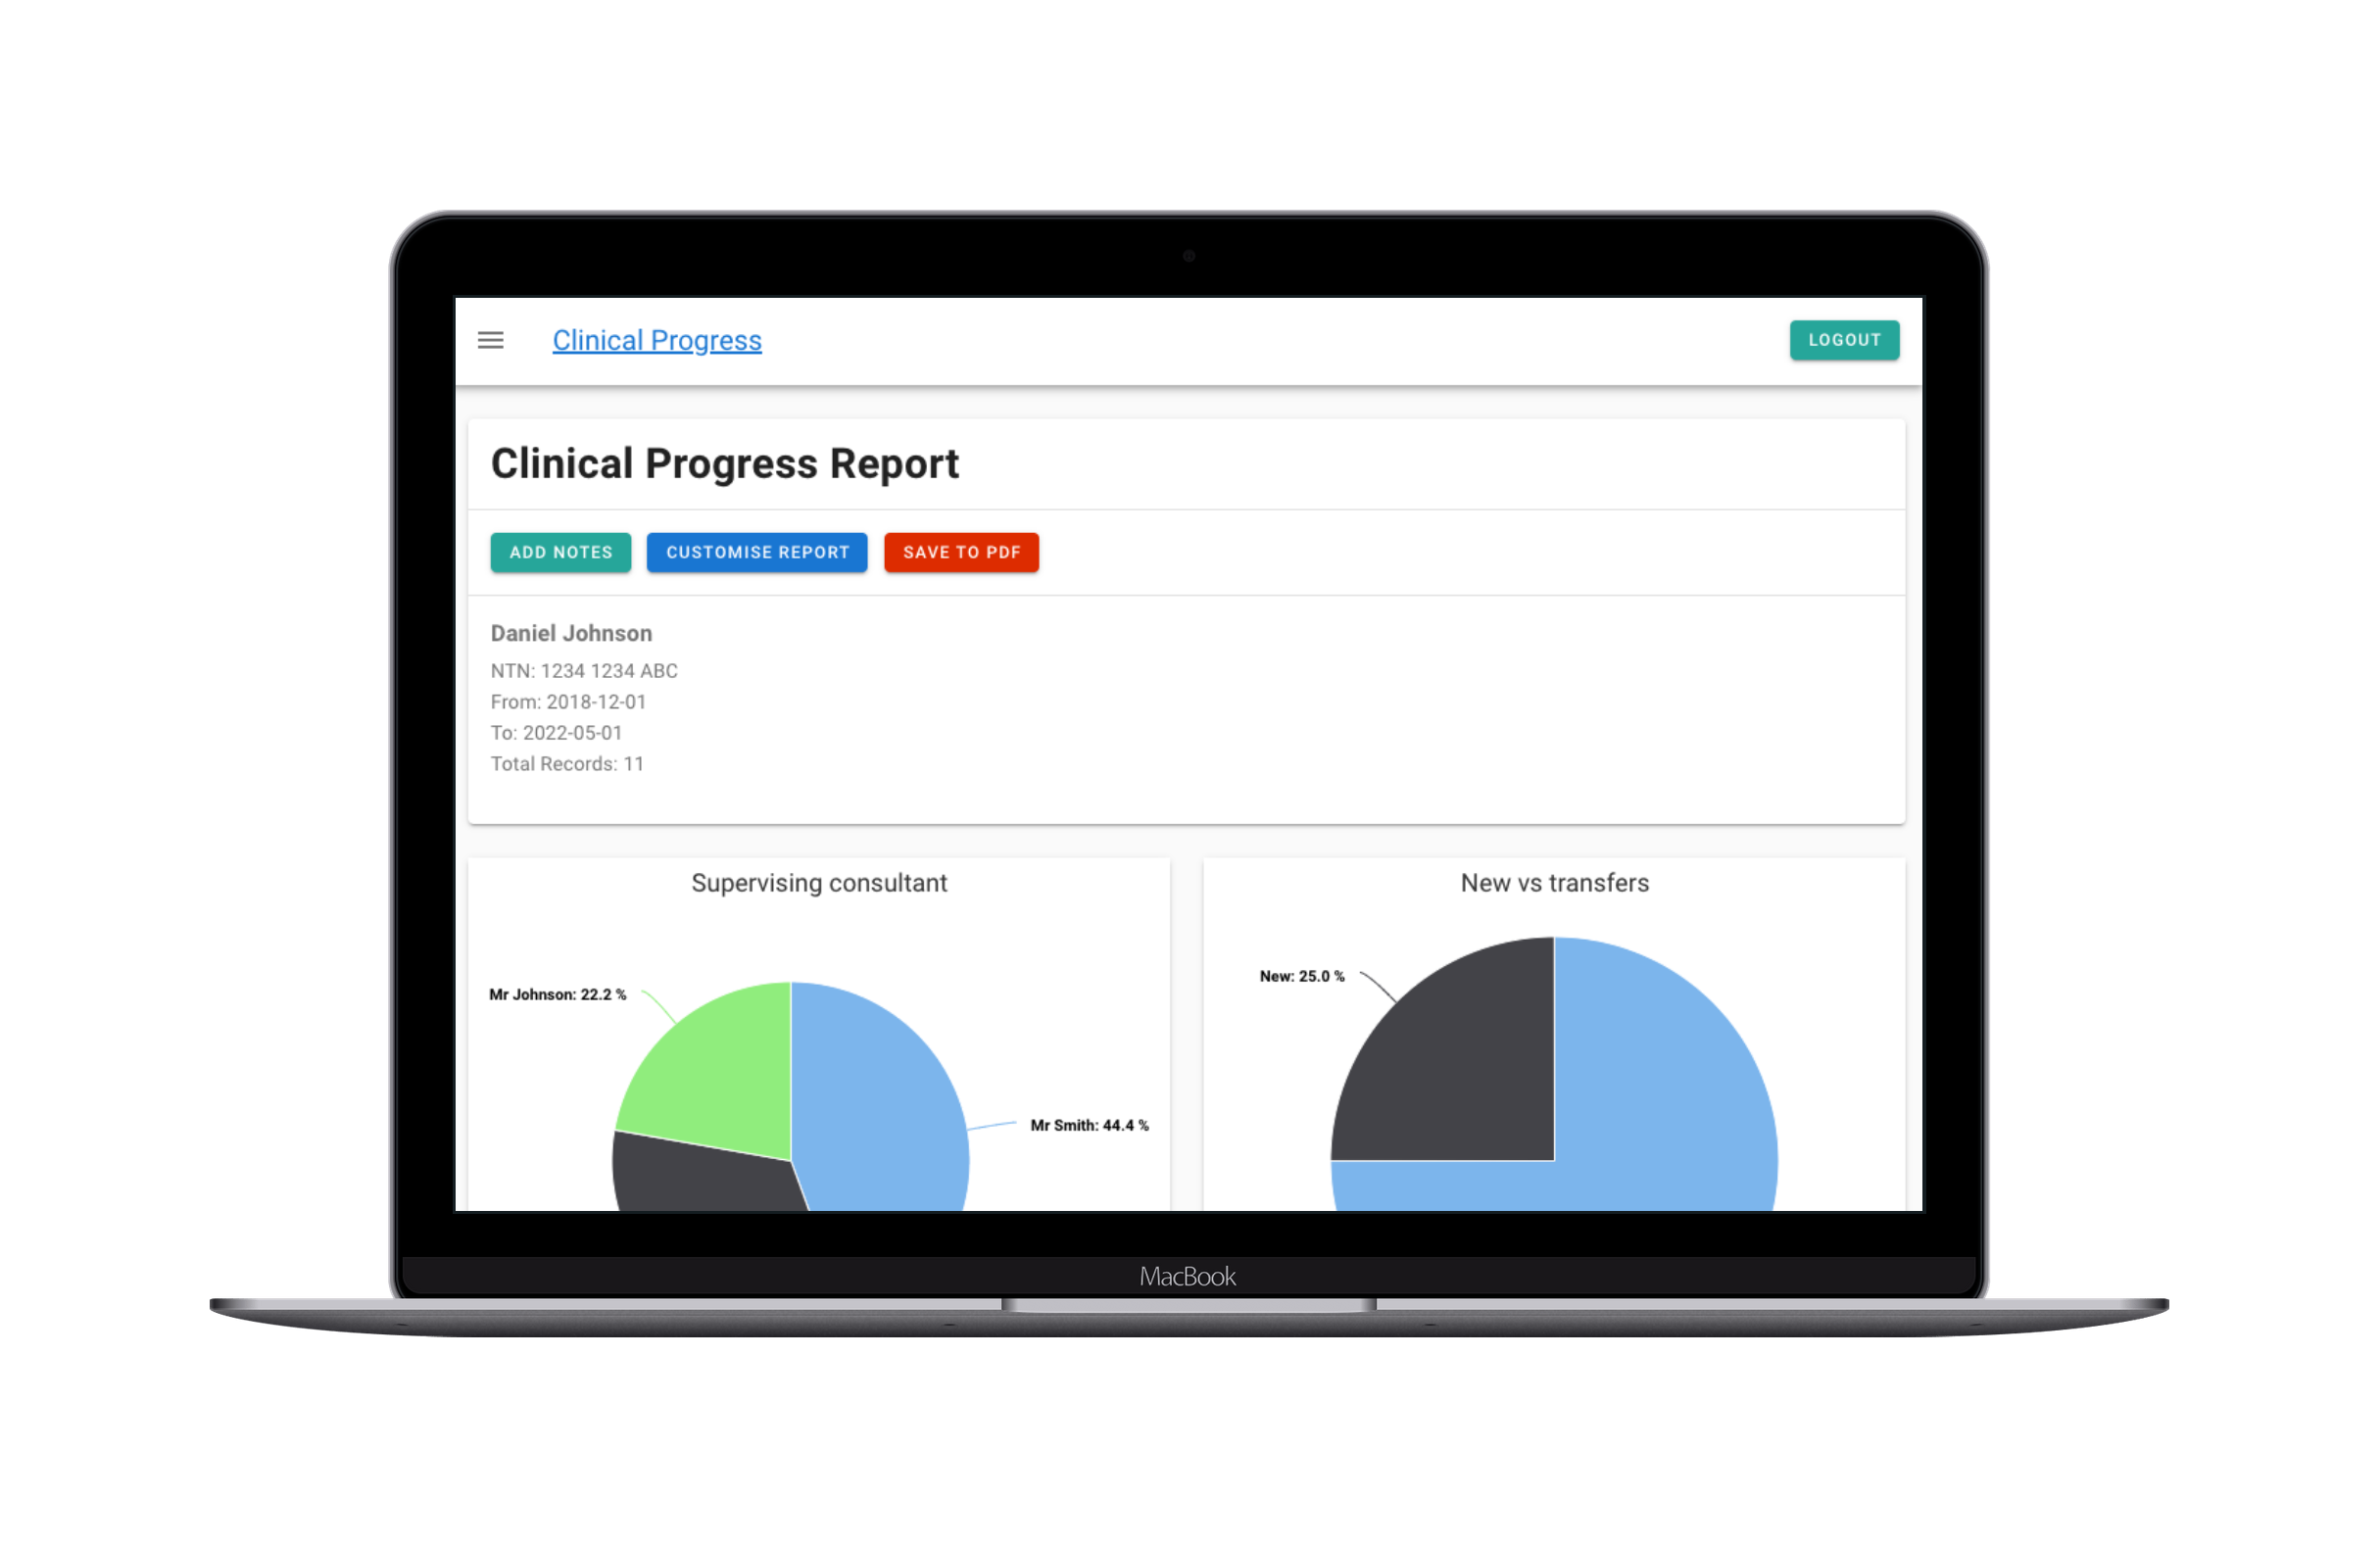 Clinical progress web app screenshot with pie charts and forms